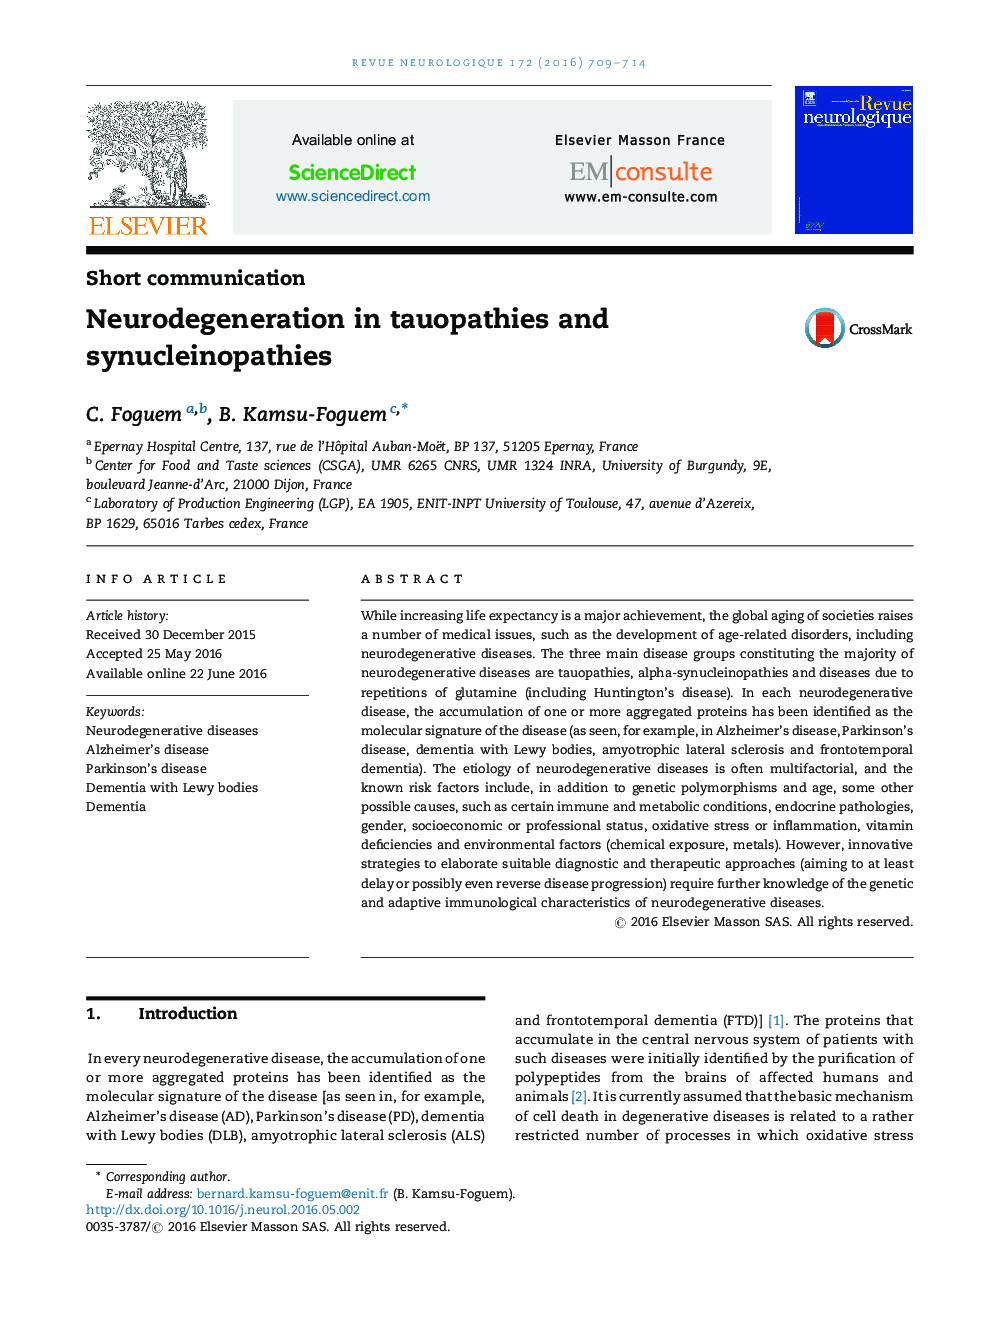 Short communicationNeurodegeneration in tauopathies and synucleinopathies